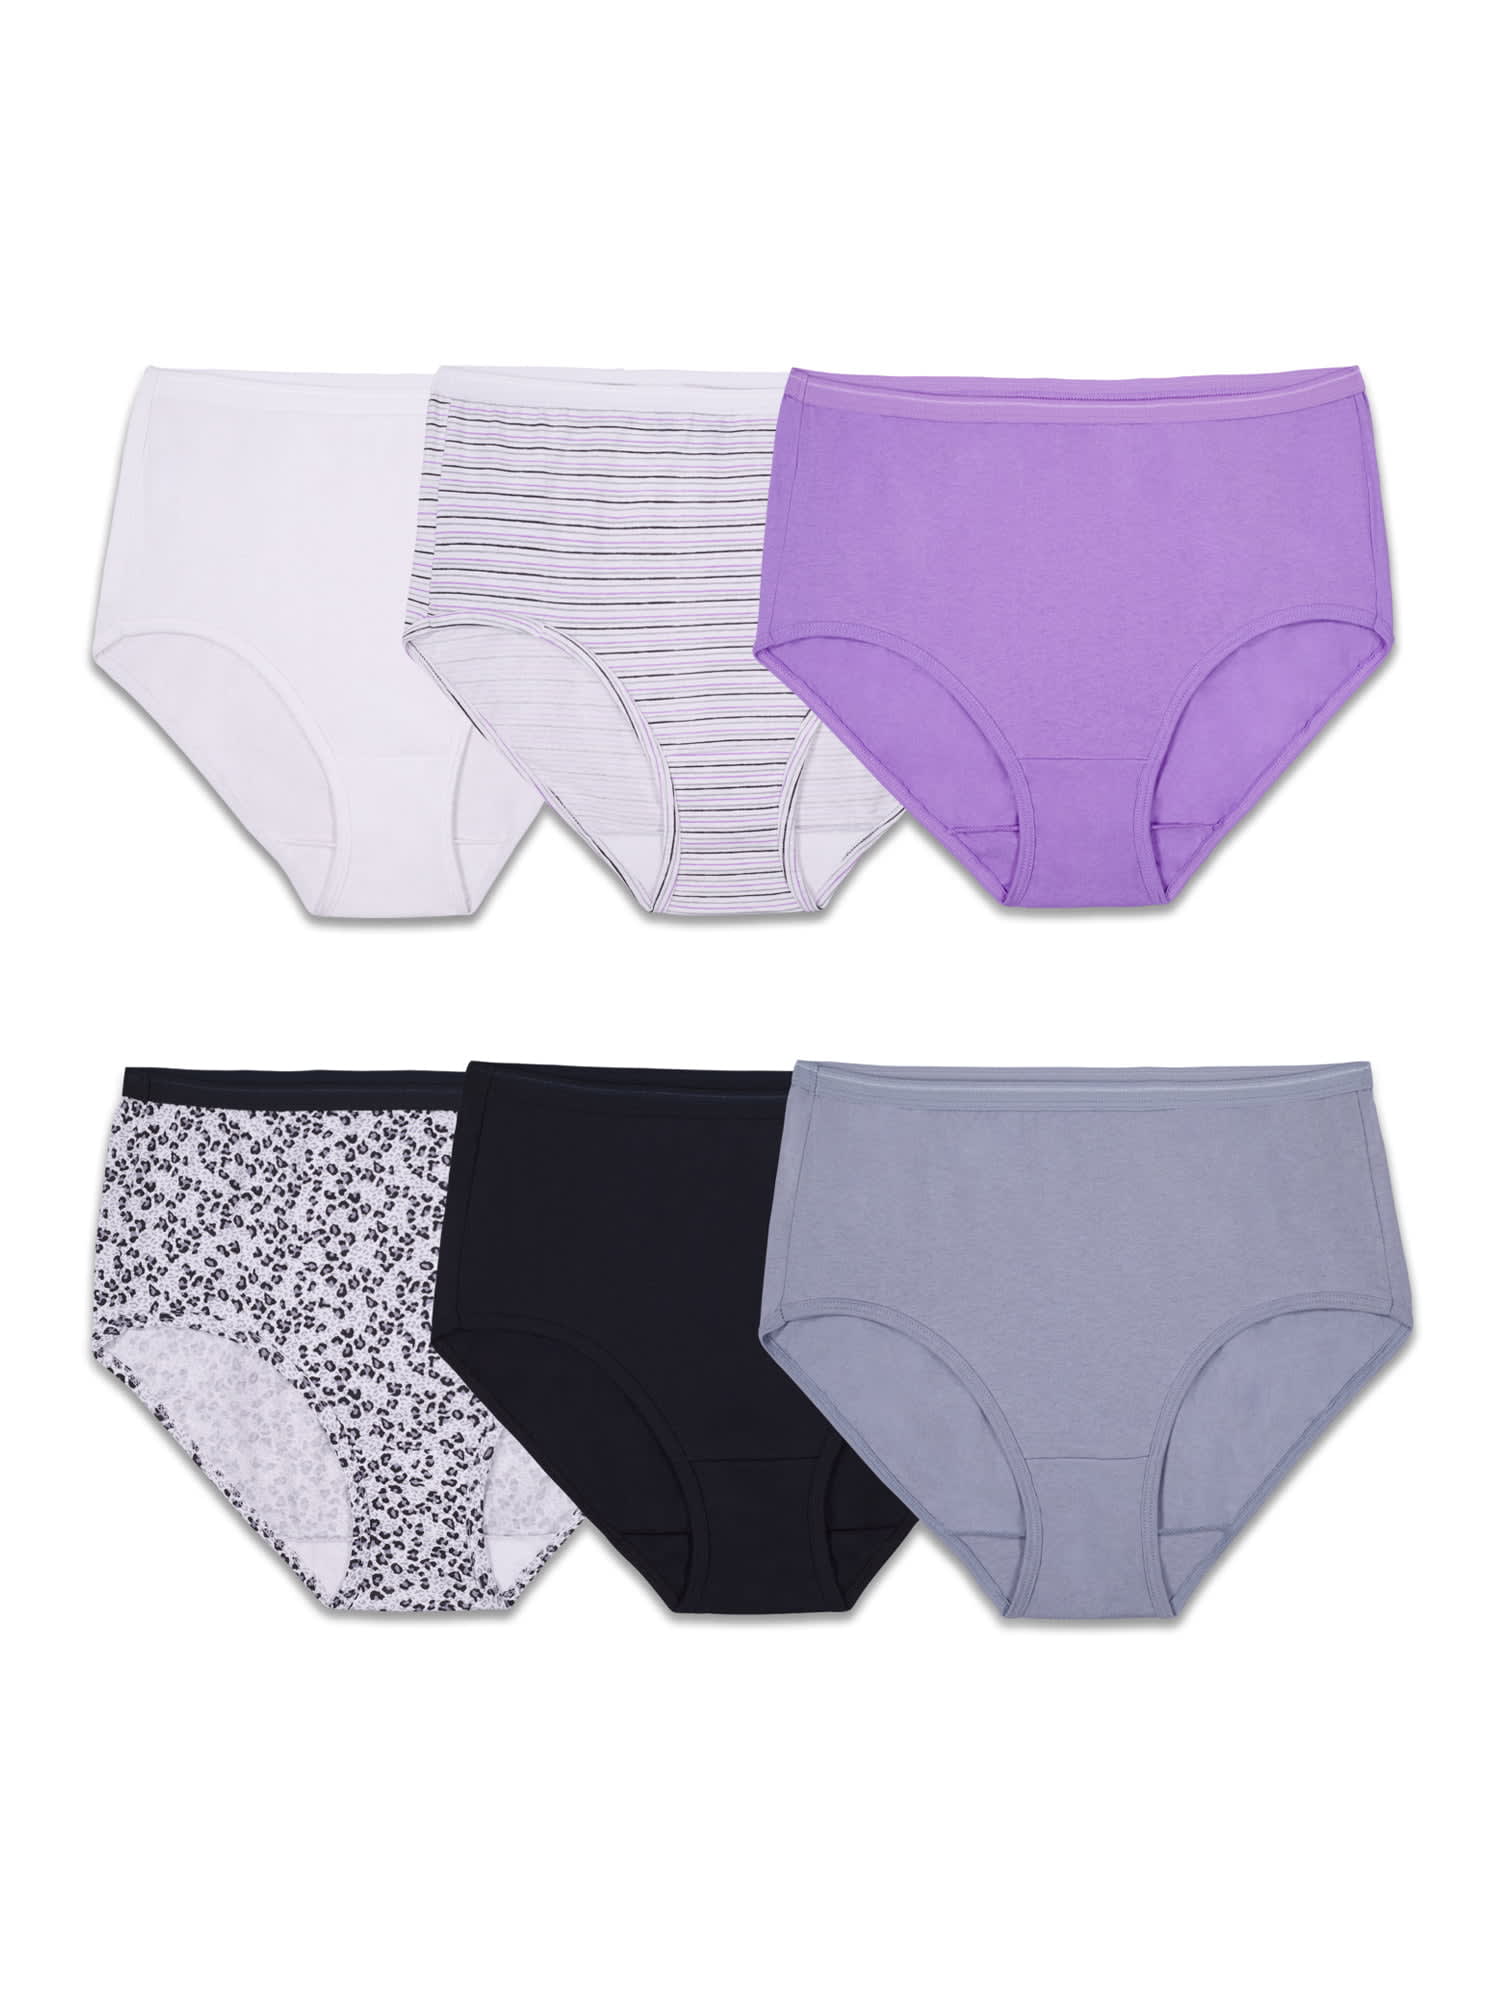 Fruit of the Loom Women's Brief Underwear, 6 Pack, Sizes S-3XL - DroneUp  Delivery